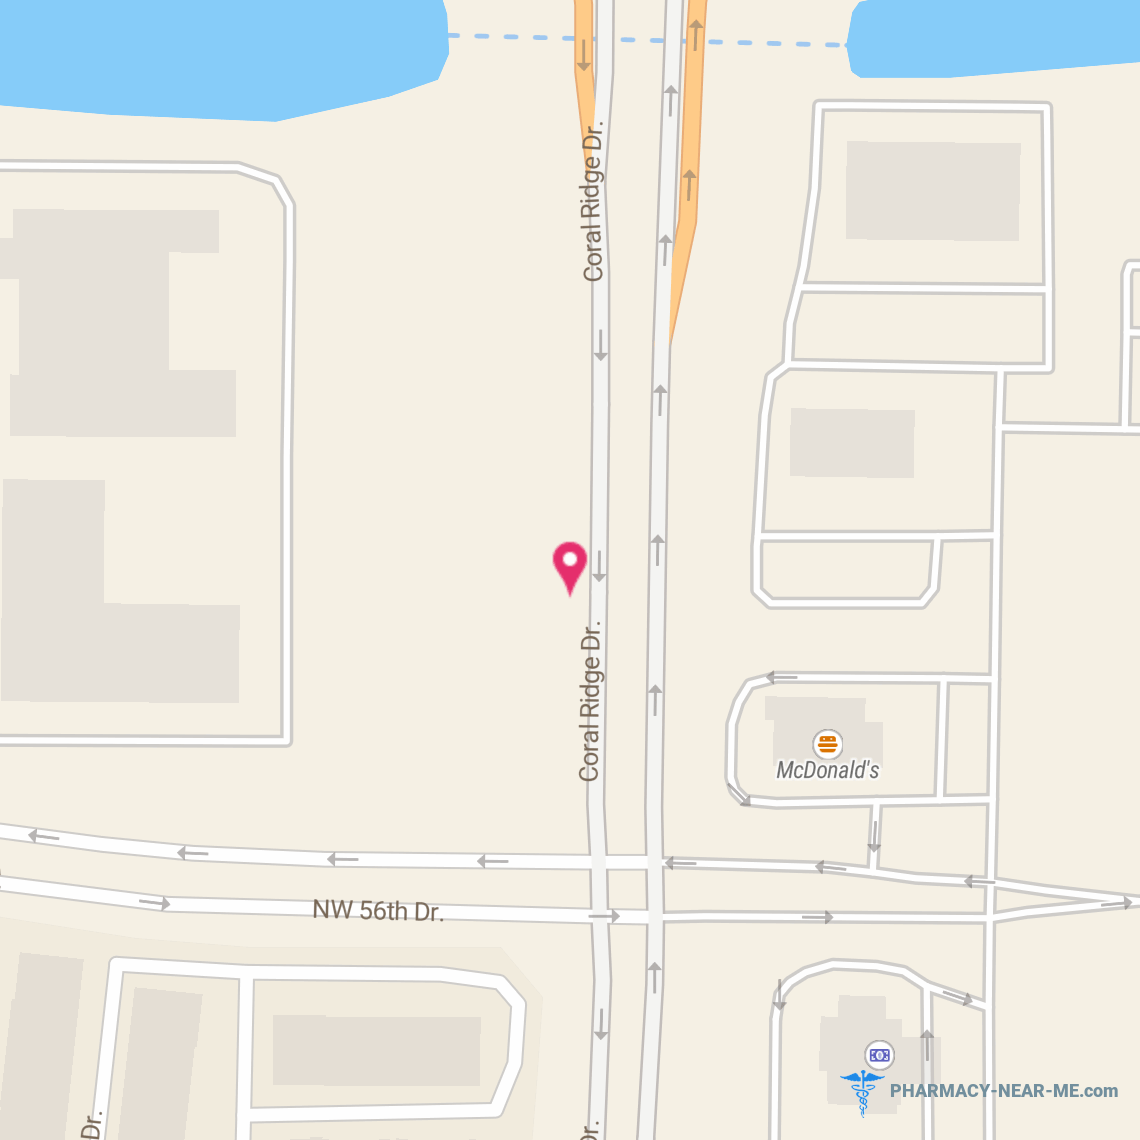 CVS PHARMACY 05930 - Pharmacy Hours, Phone, Reviews & Information: 5701 Coral Ridge Drive, Coral Springs, Florida 33076, United States